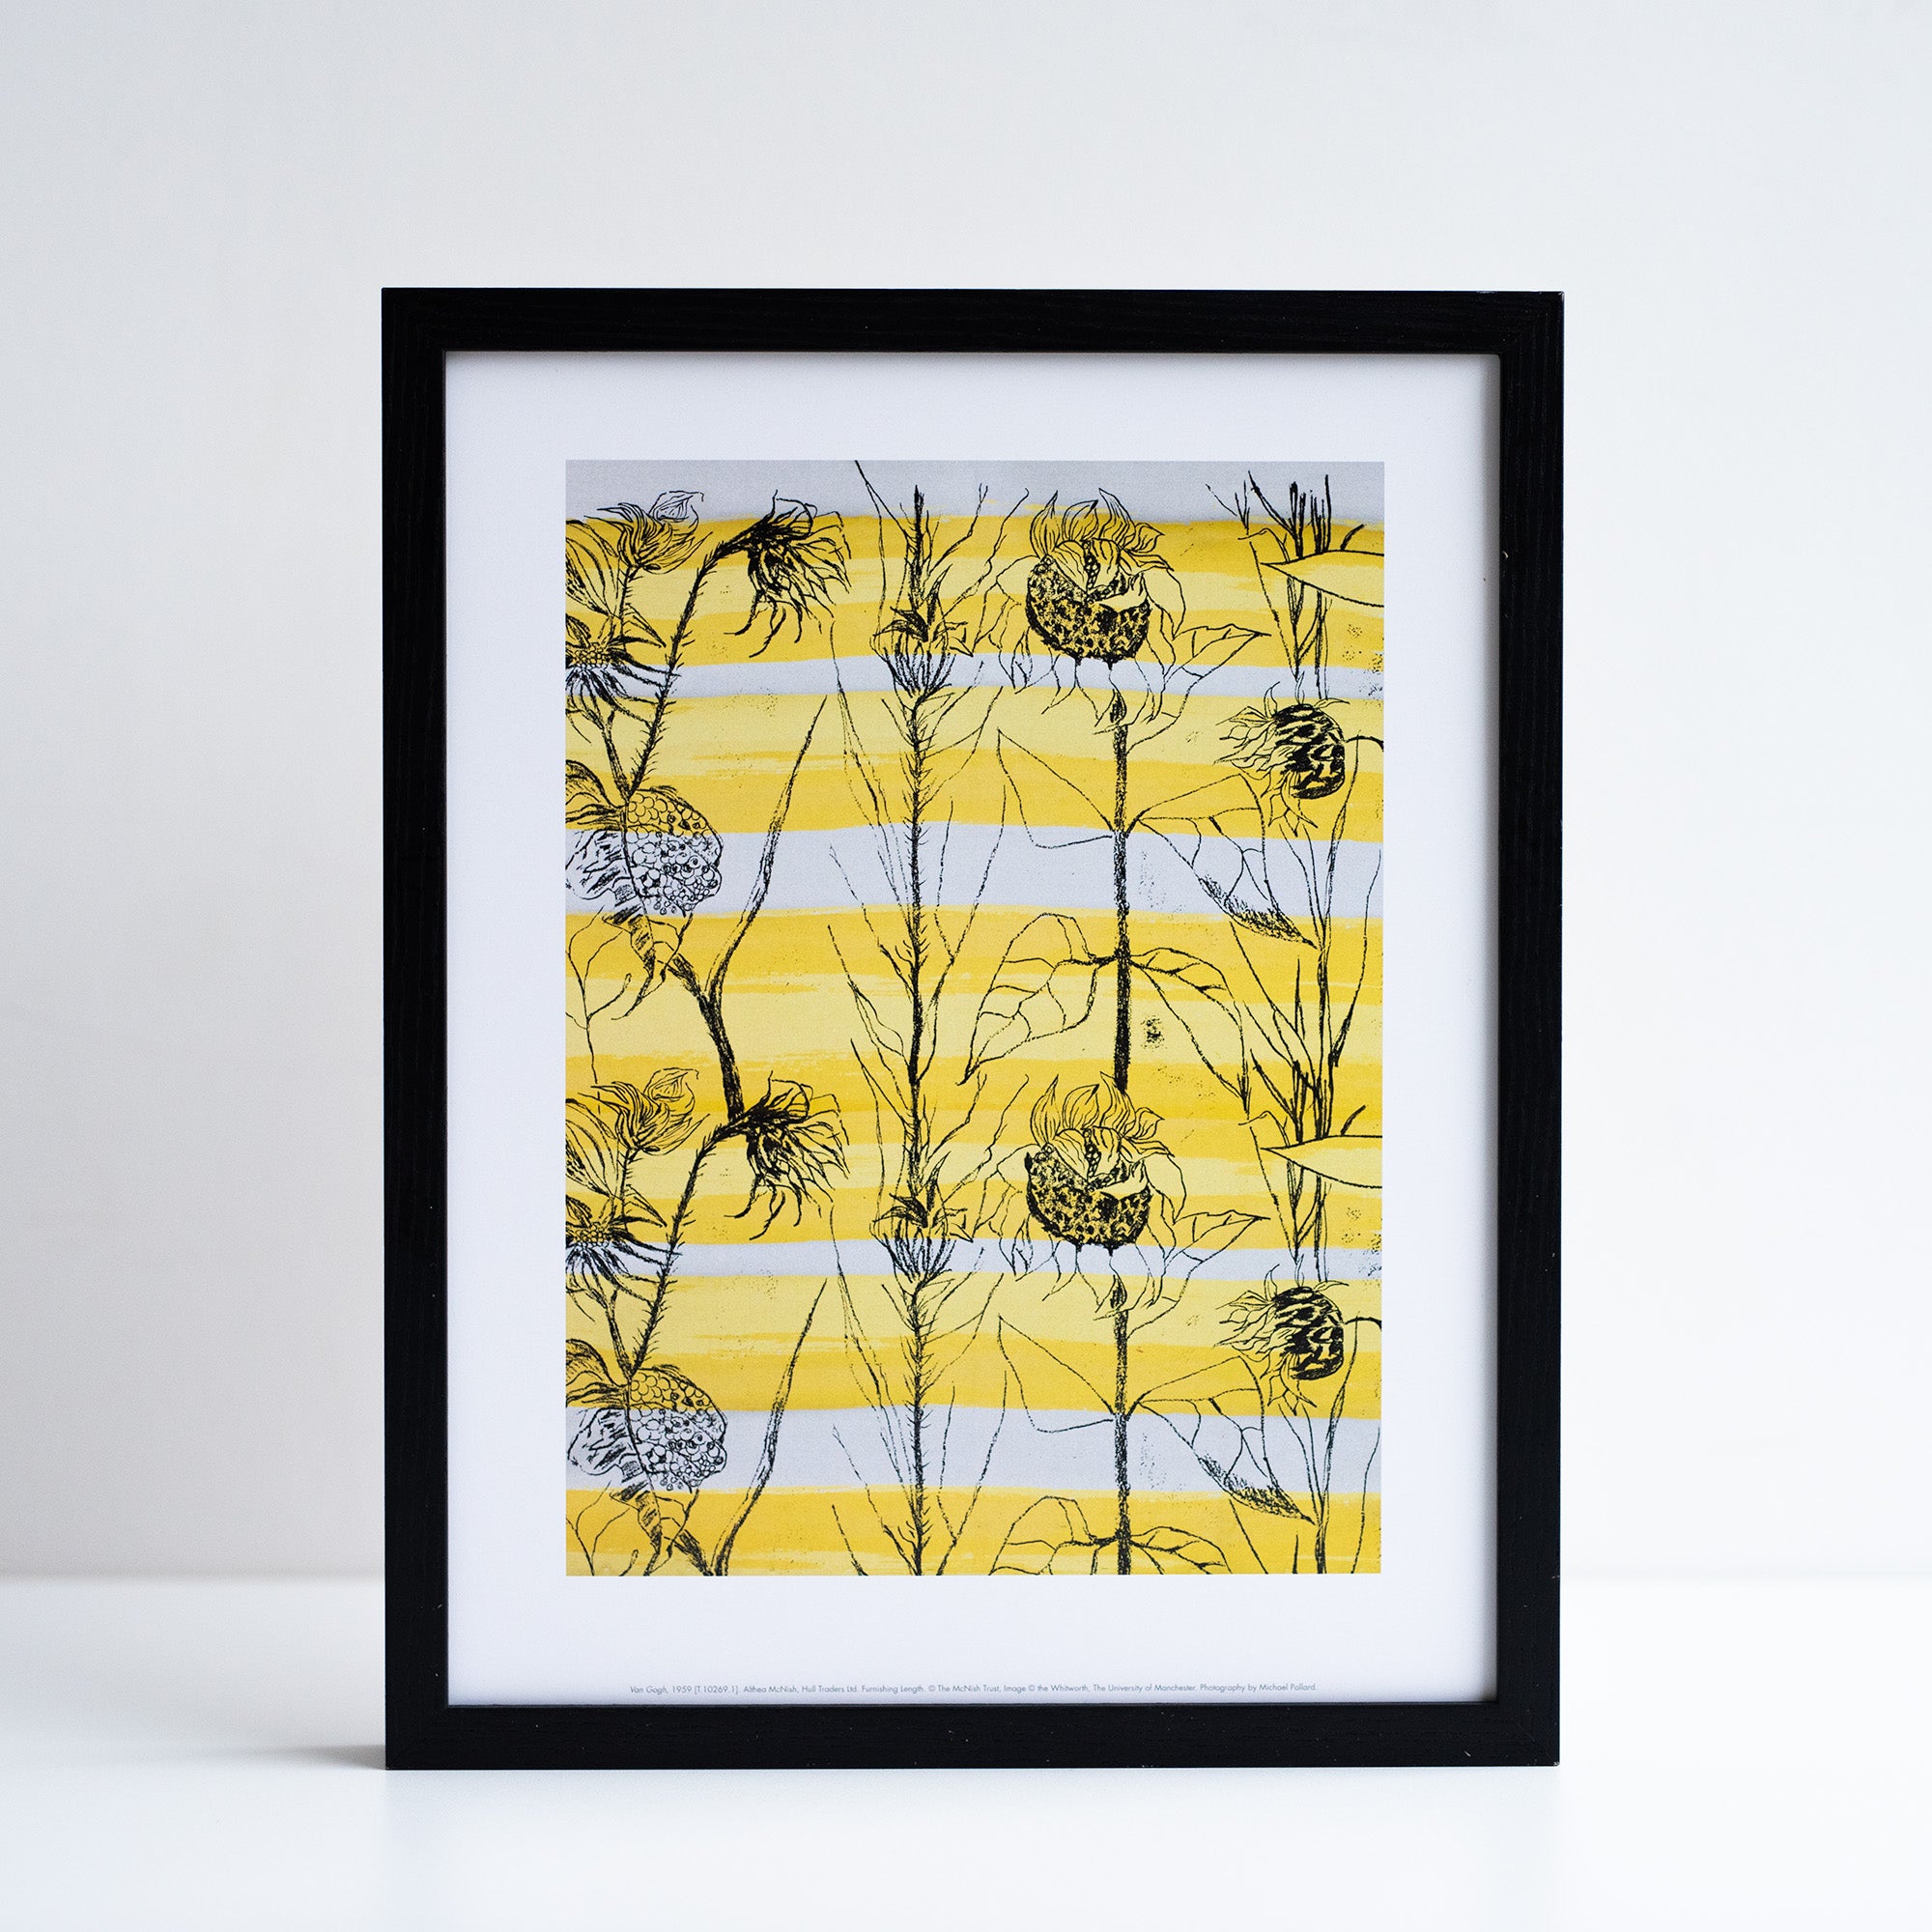 Framed reproduction of Van Gogh textile design by Althea McNish. Yellow, white and black floral design